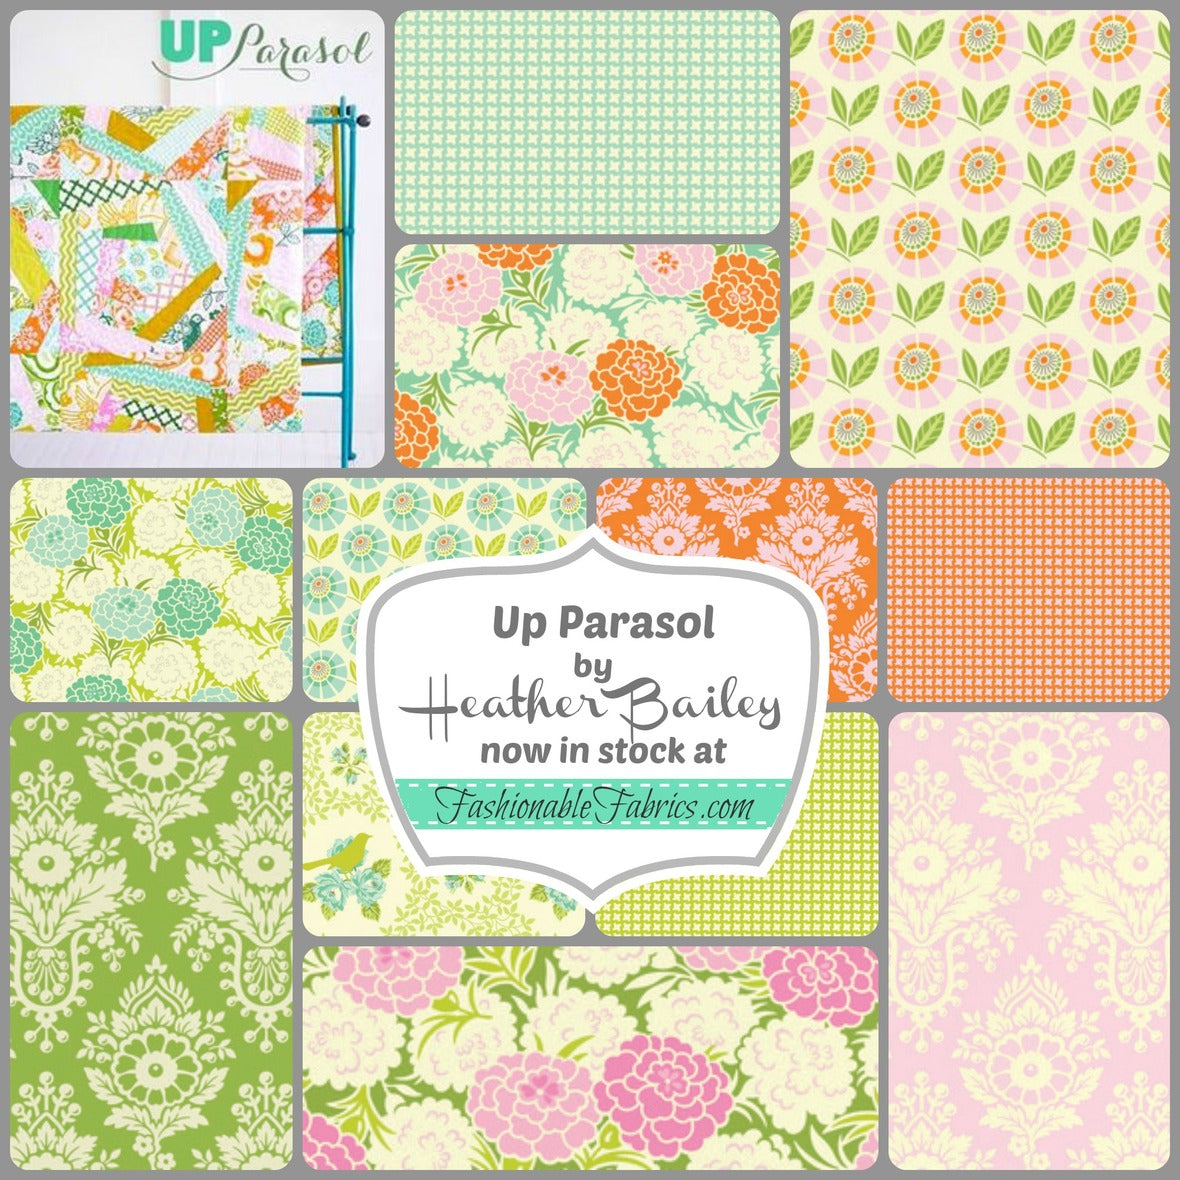 Up Parasol by Heather Bailey for FreeSpirit Fabrics